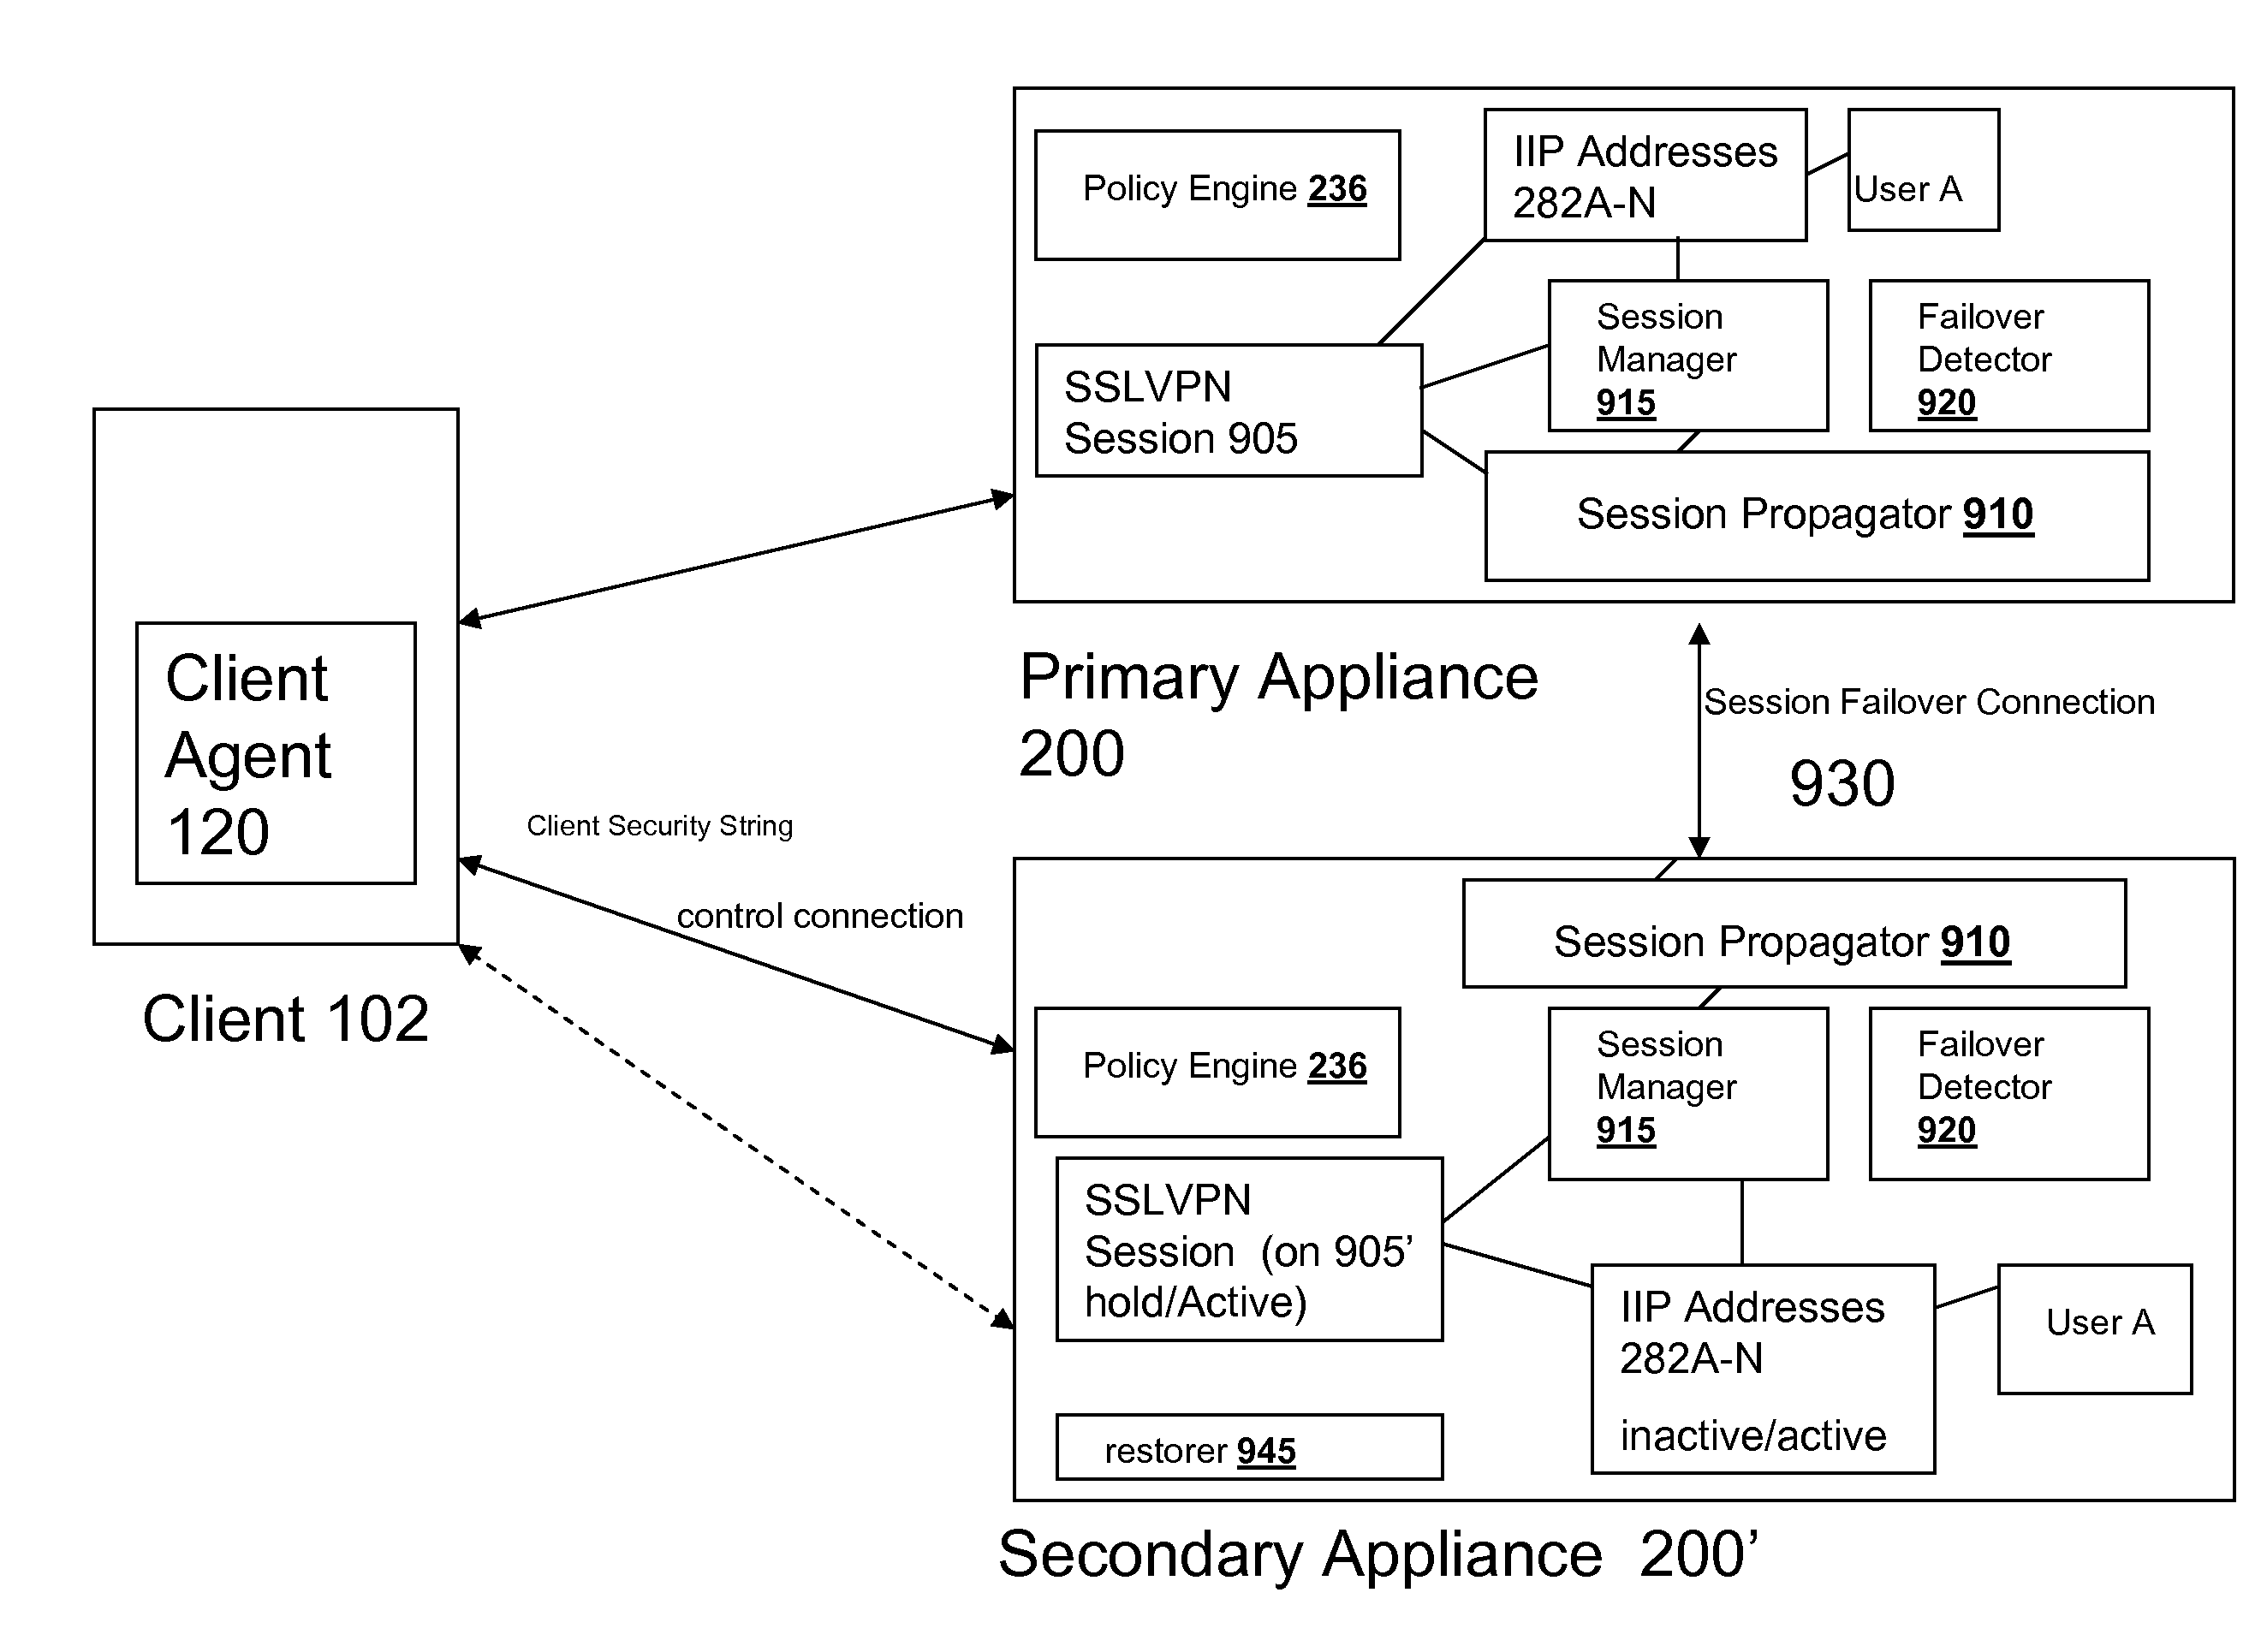 Systems and Methods for Providing IIP Address Stickiness in an SSL VPN Session Failover Environment